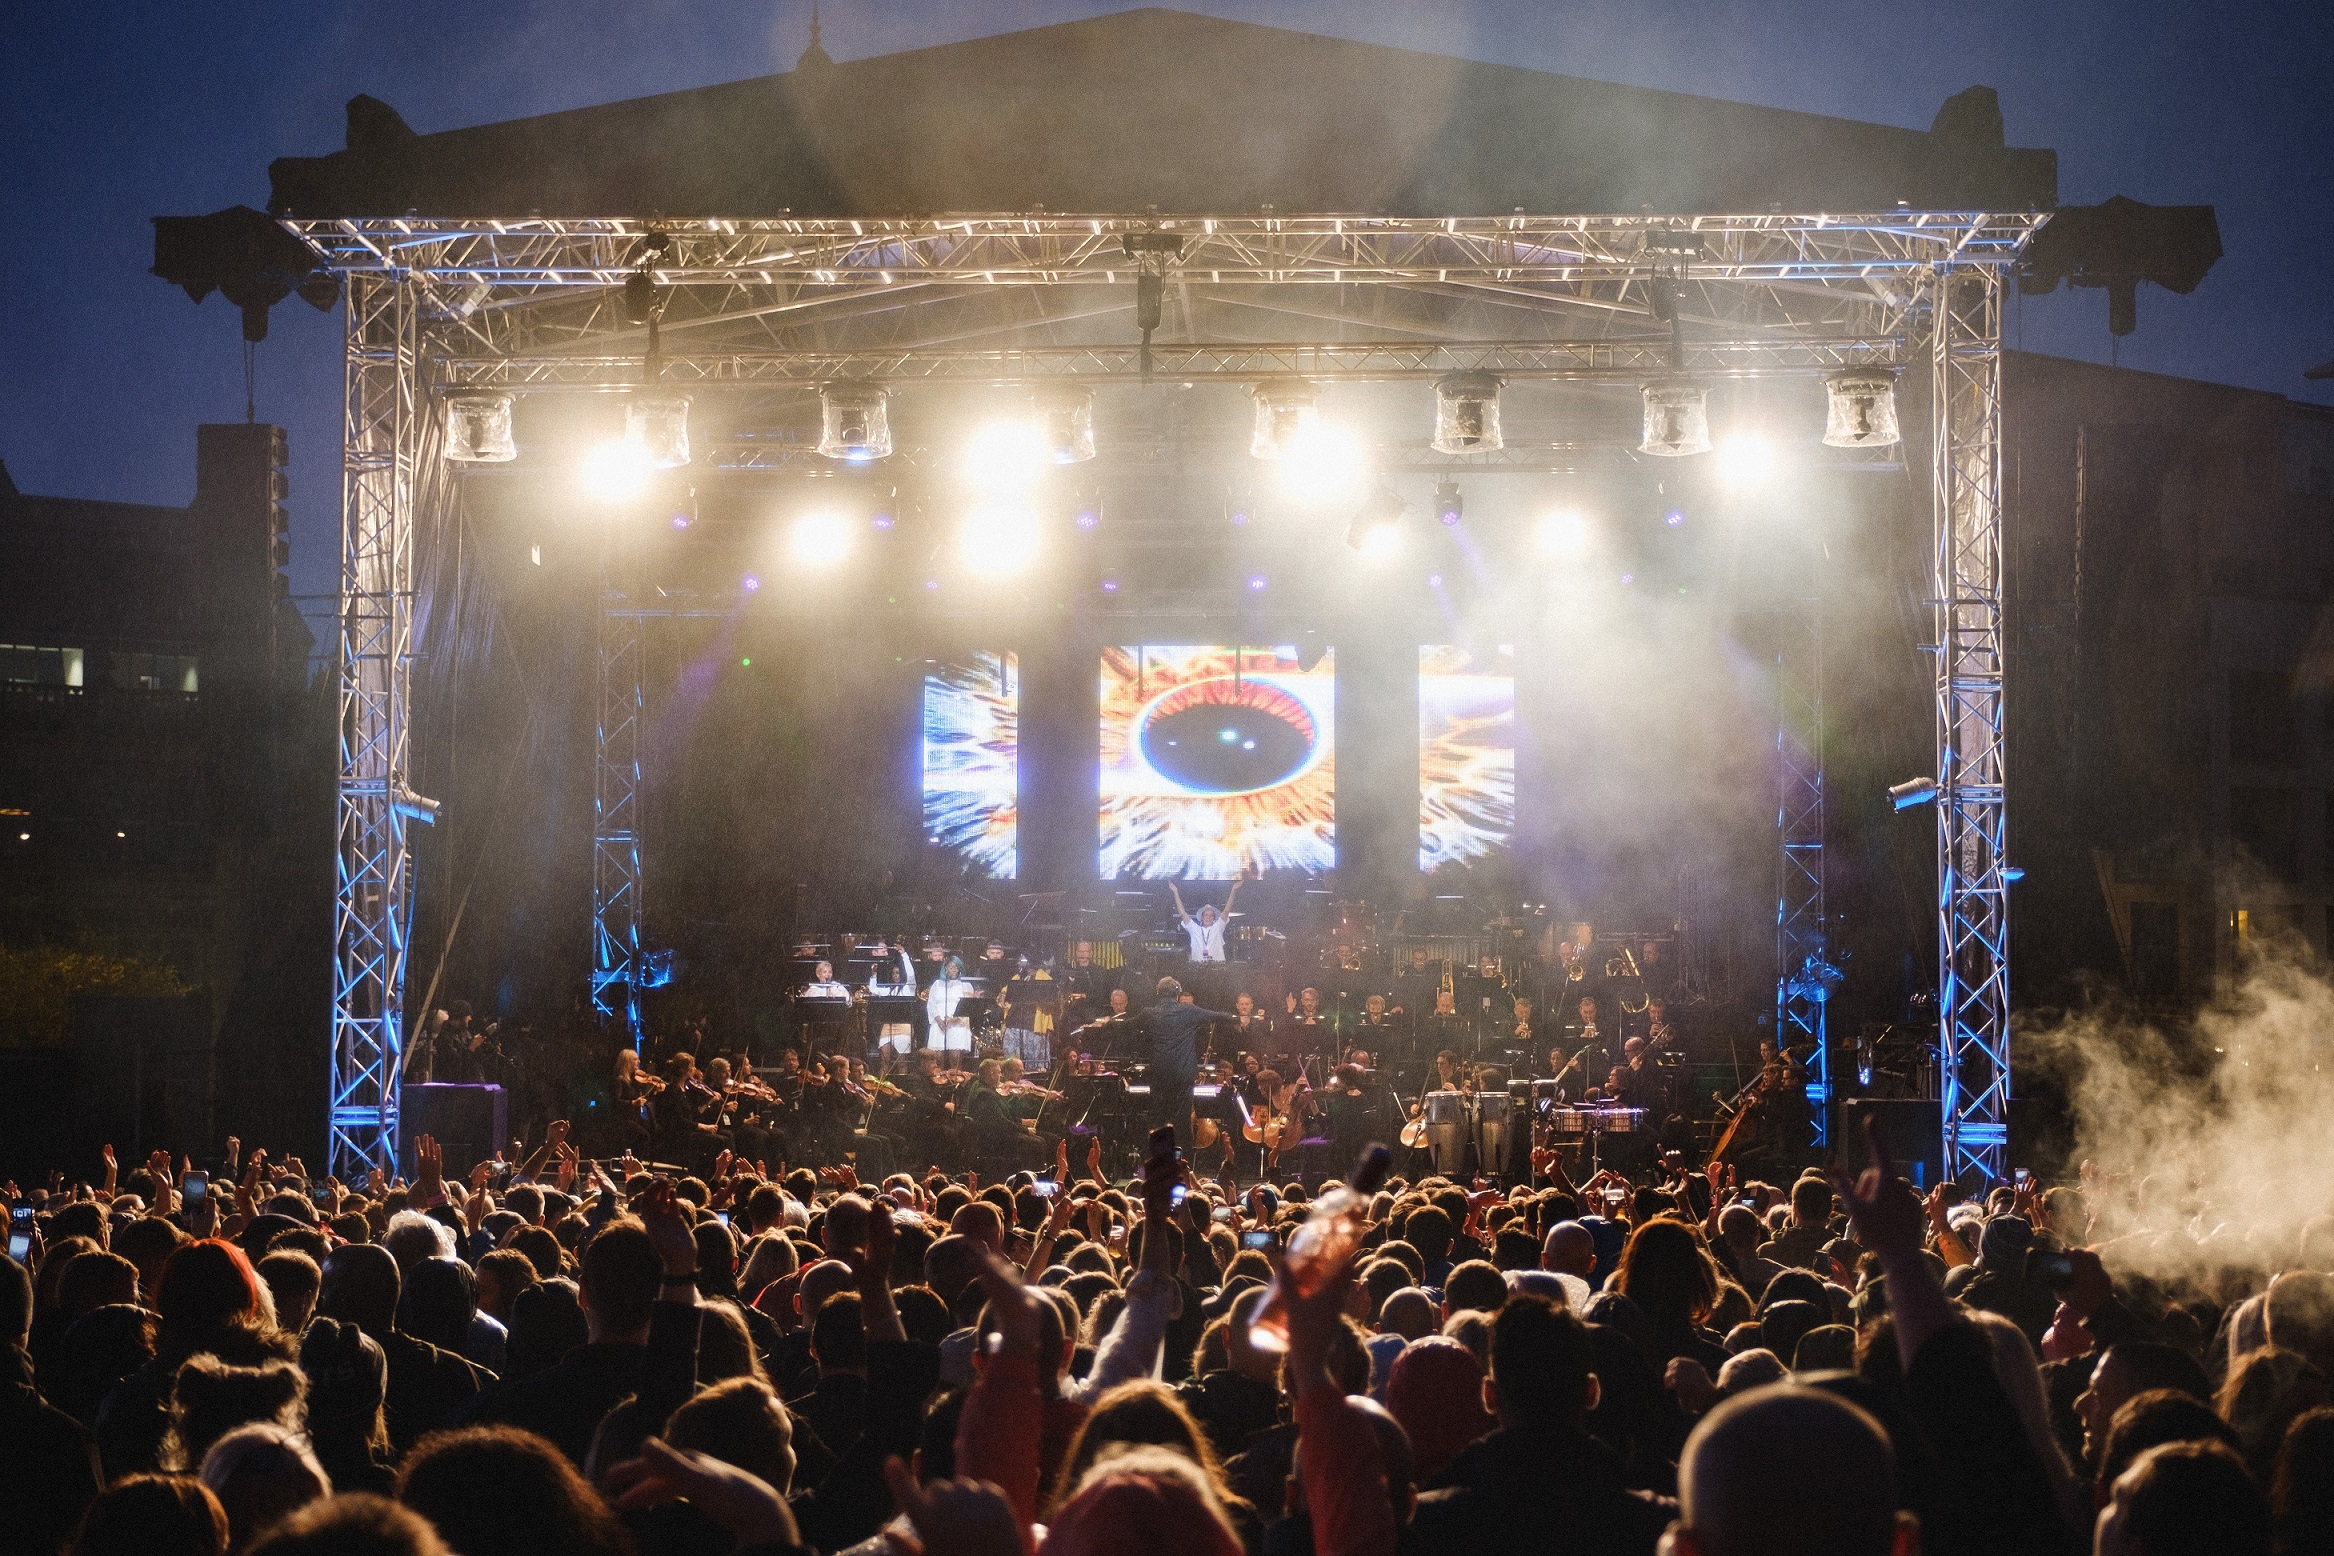 Millennium Square welcomes 80s legends, club classics and a movie